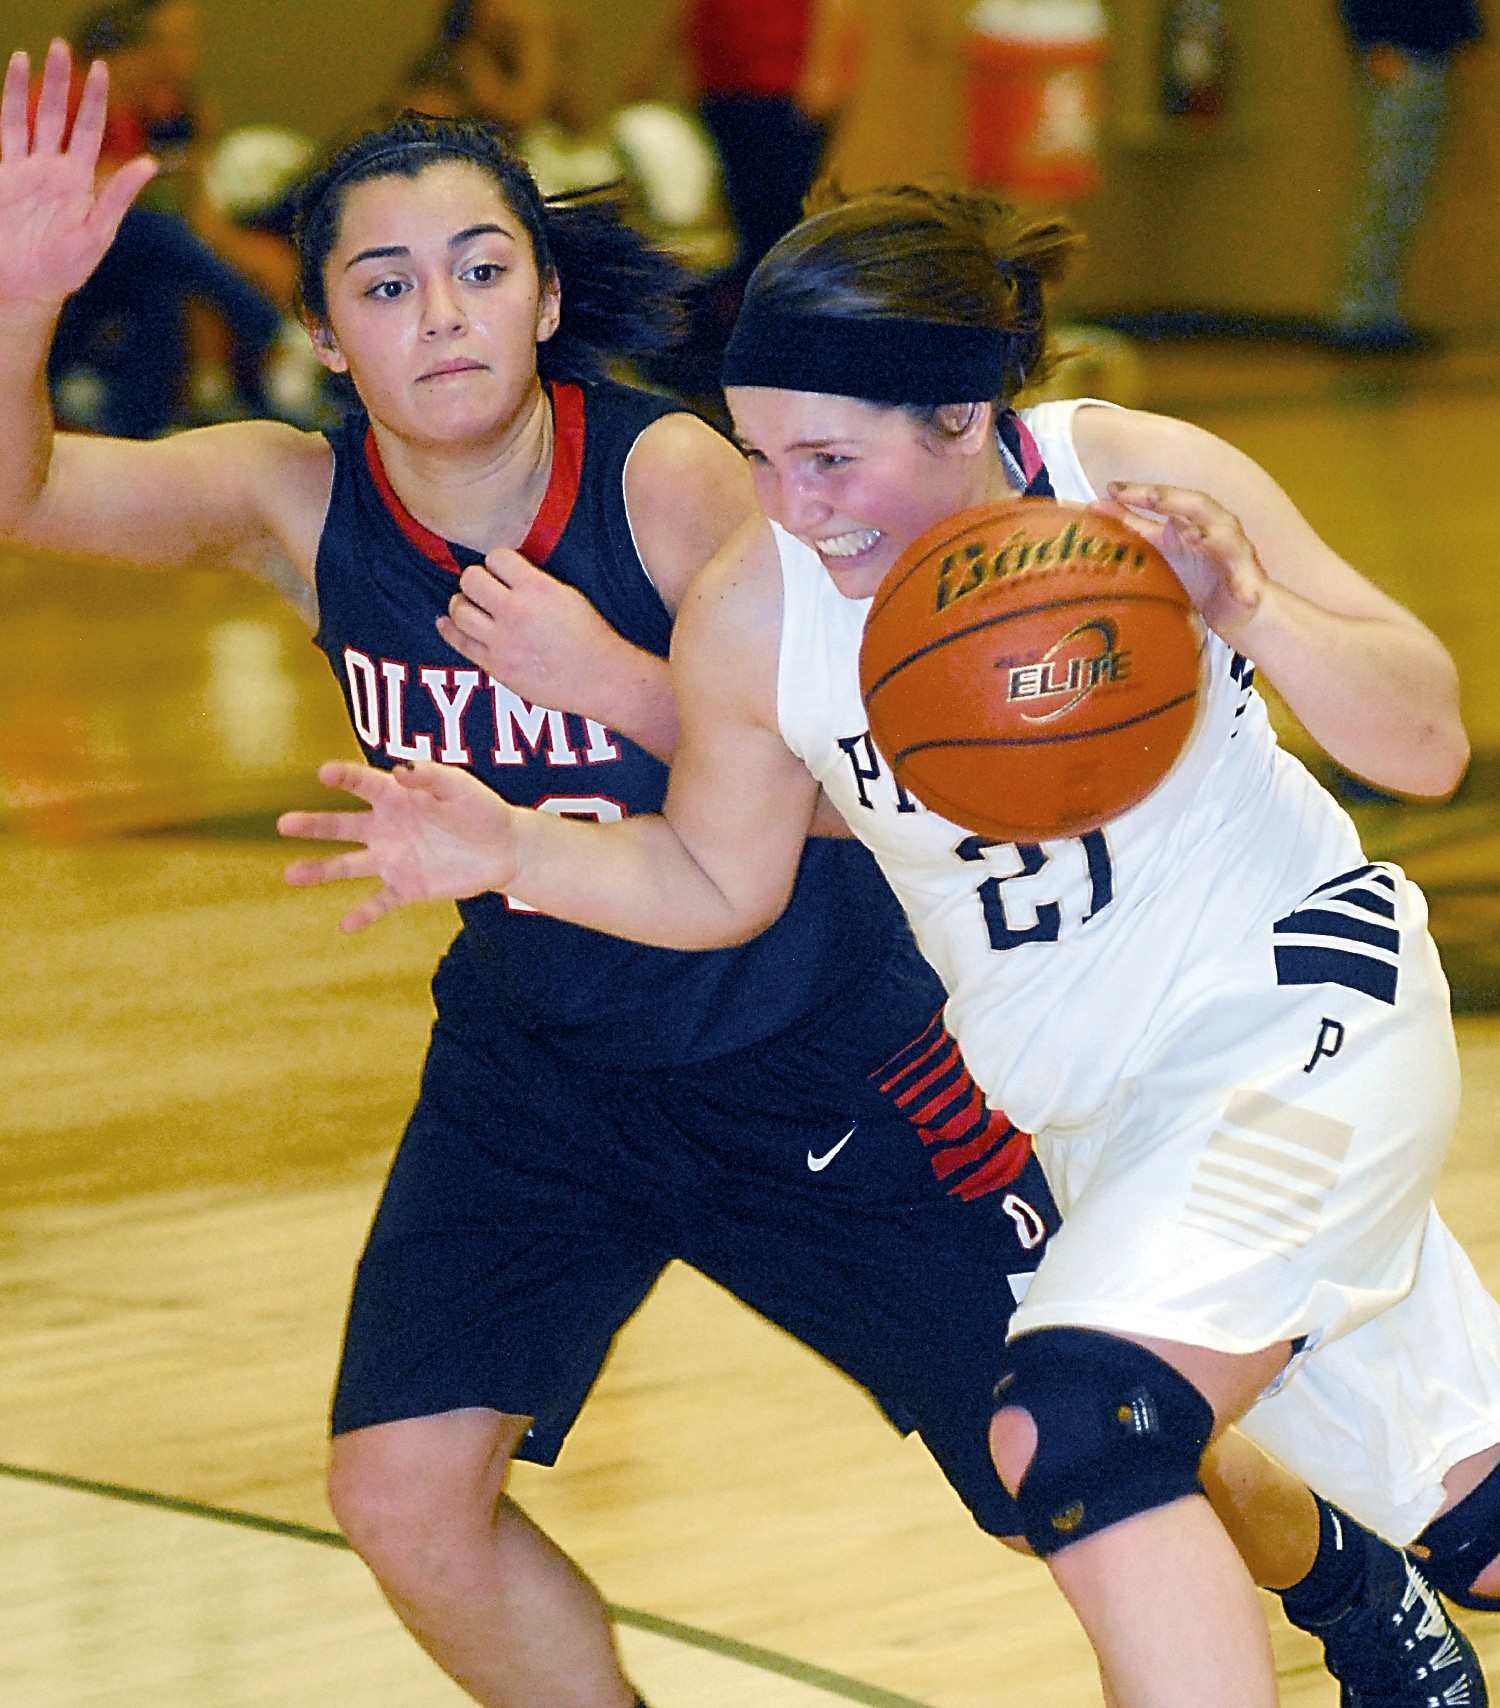 Peninsula's Alison Knowles drives past Olympic's Amanda Carper in the second half of the Pirates' 64-58 win. Knowles finished with a game-high 15 points. Keith Thorpe/Peninsula Daily News